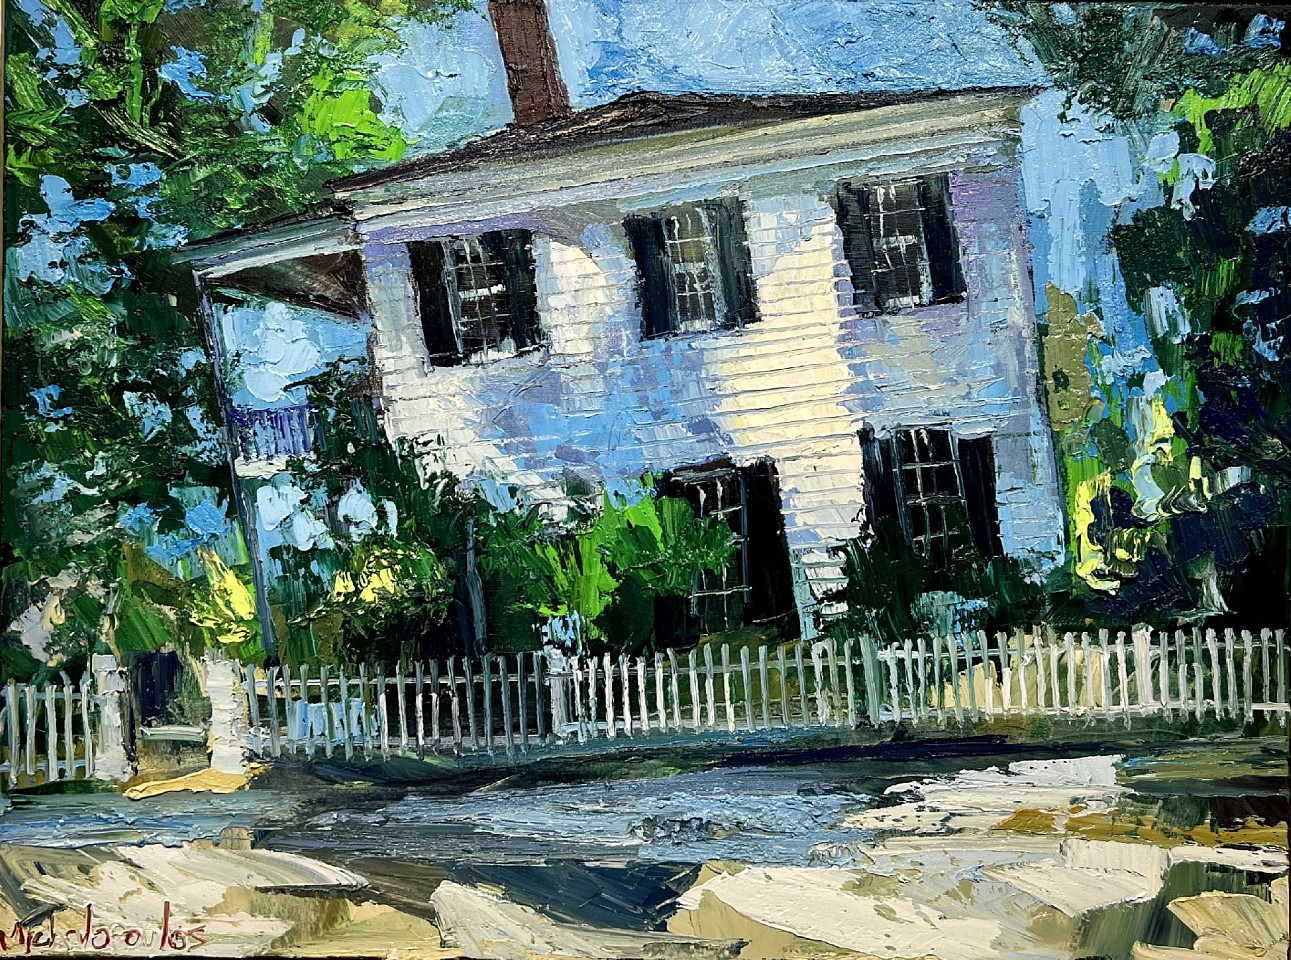 James Michalopoulos, Siding with the Neighbor
Oil on Canvas, 30 x 40 in.
$12,370